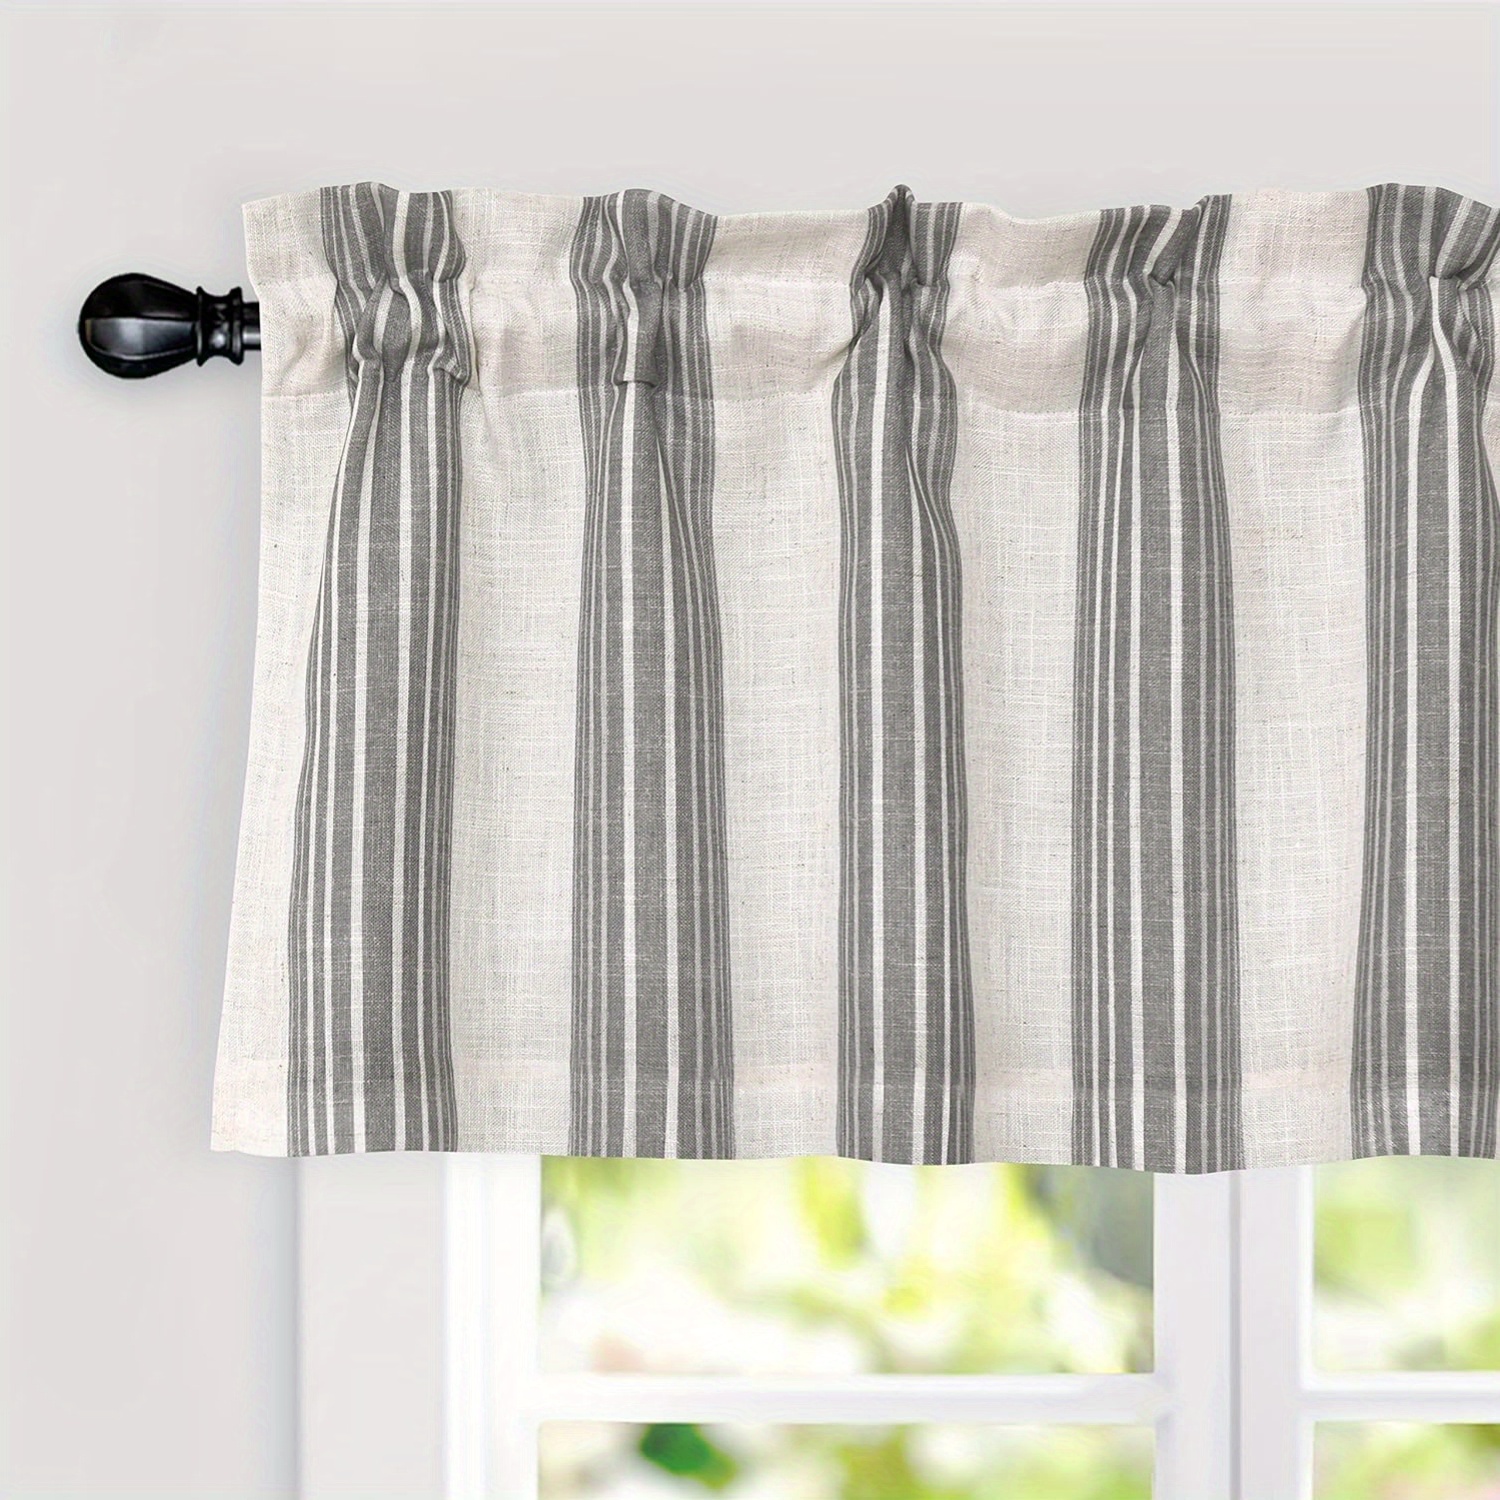 

Chris Vertical Striped Pattern Linen Blend Thermal Insulated Blackout Linen Window Curtain Valance Rod Pocket Lined Single 52 Inch By 18 Inch Plus 2 Inch Header Jade Gray